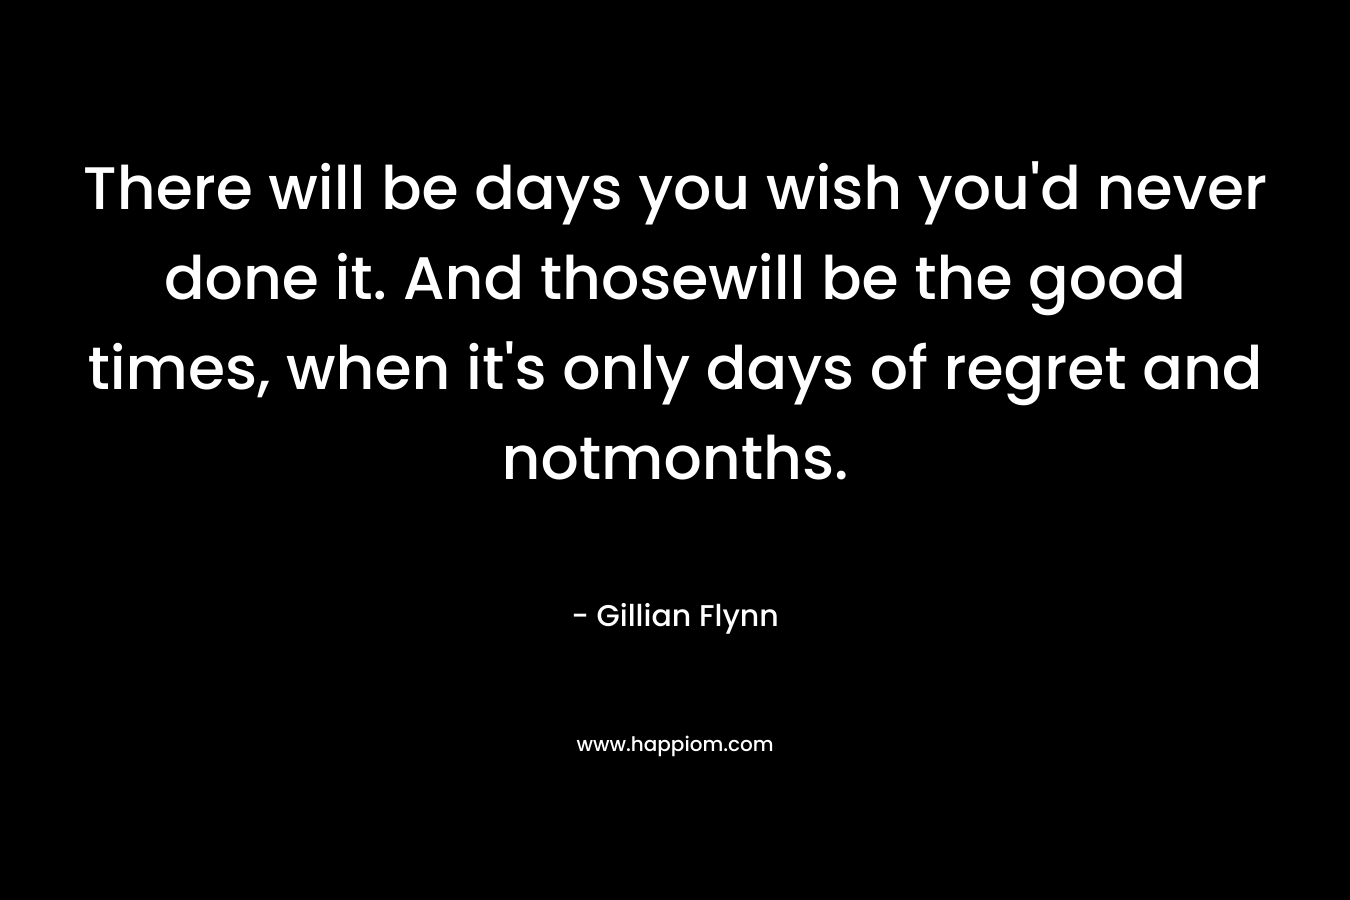 There will be days you wish you’d never done it. And thosewill be the good times, when it’s only days of regret and notmonths. – Gillian Flynn